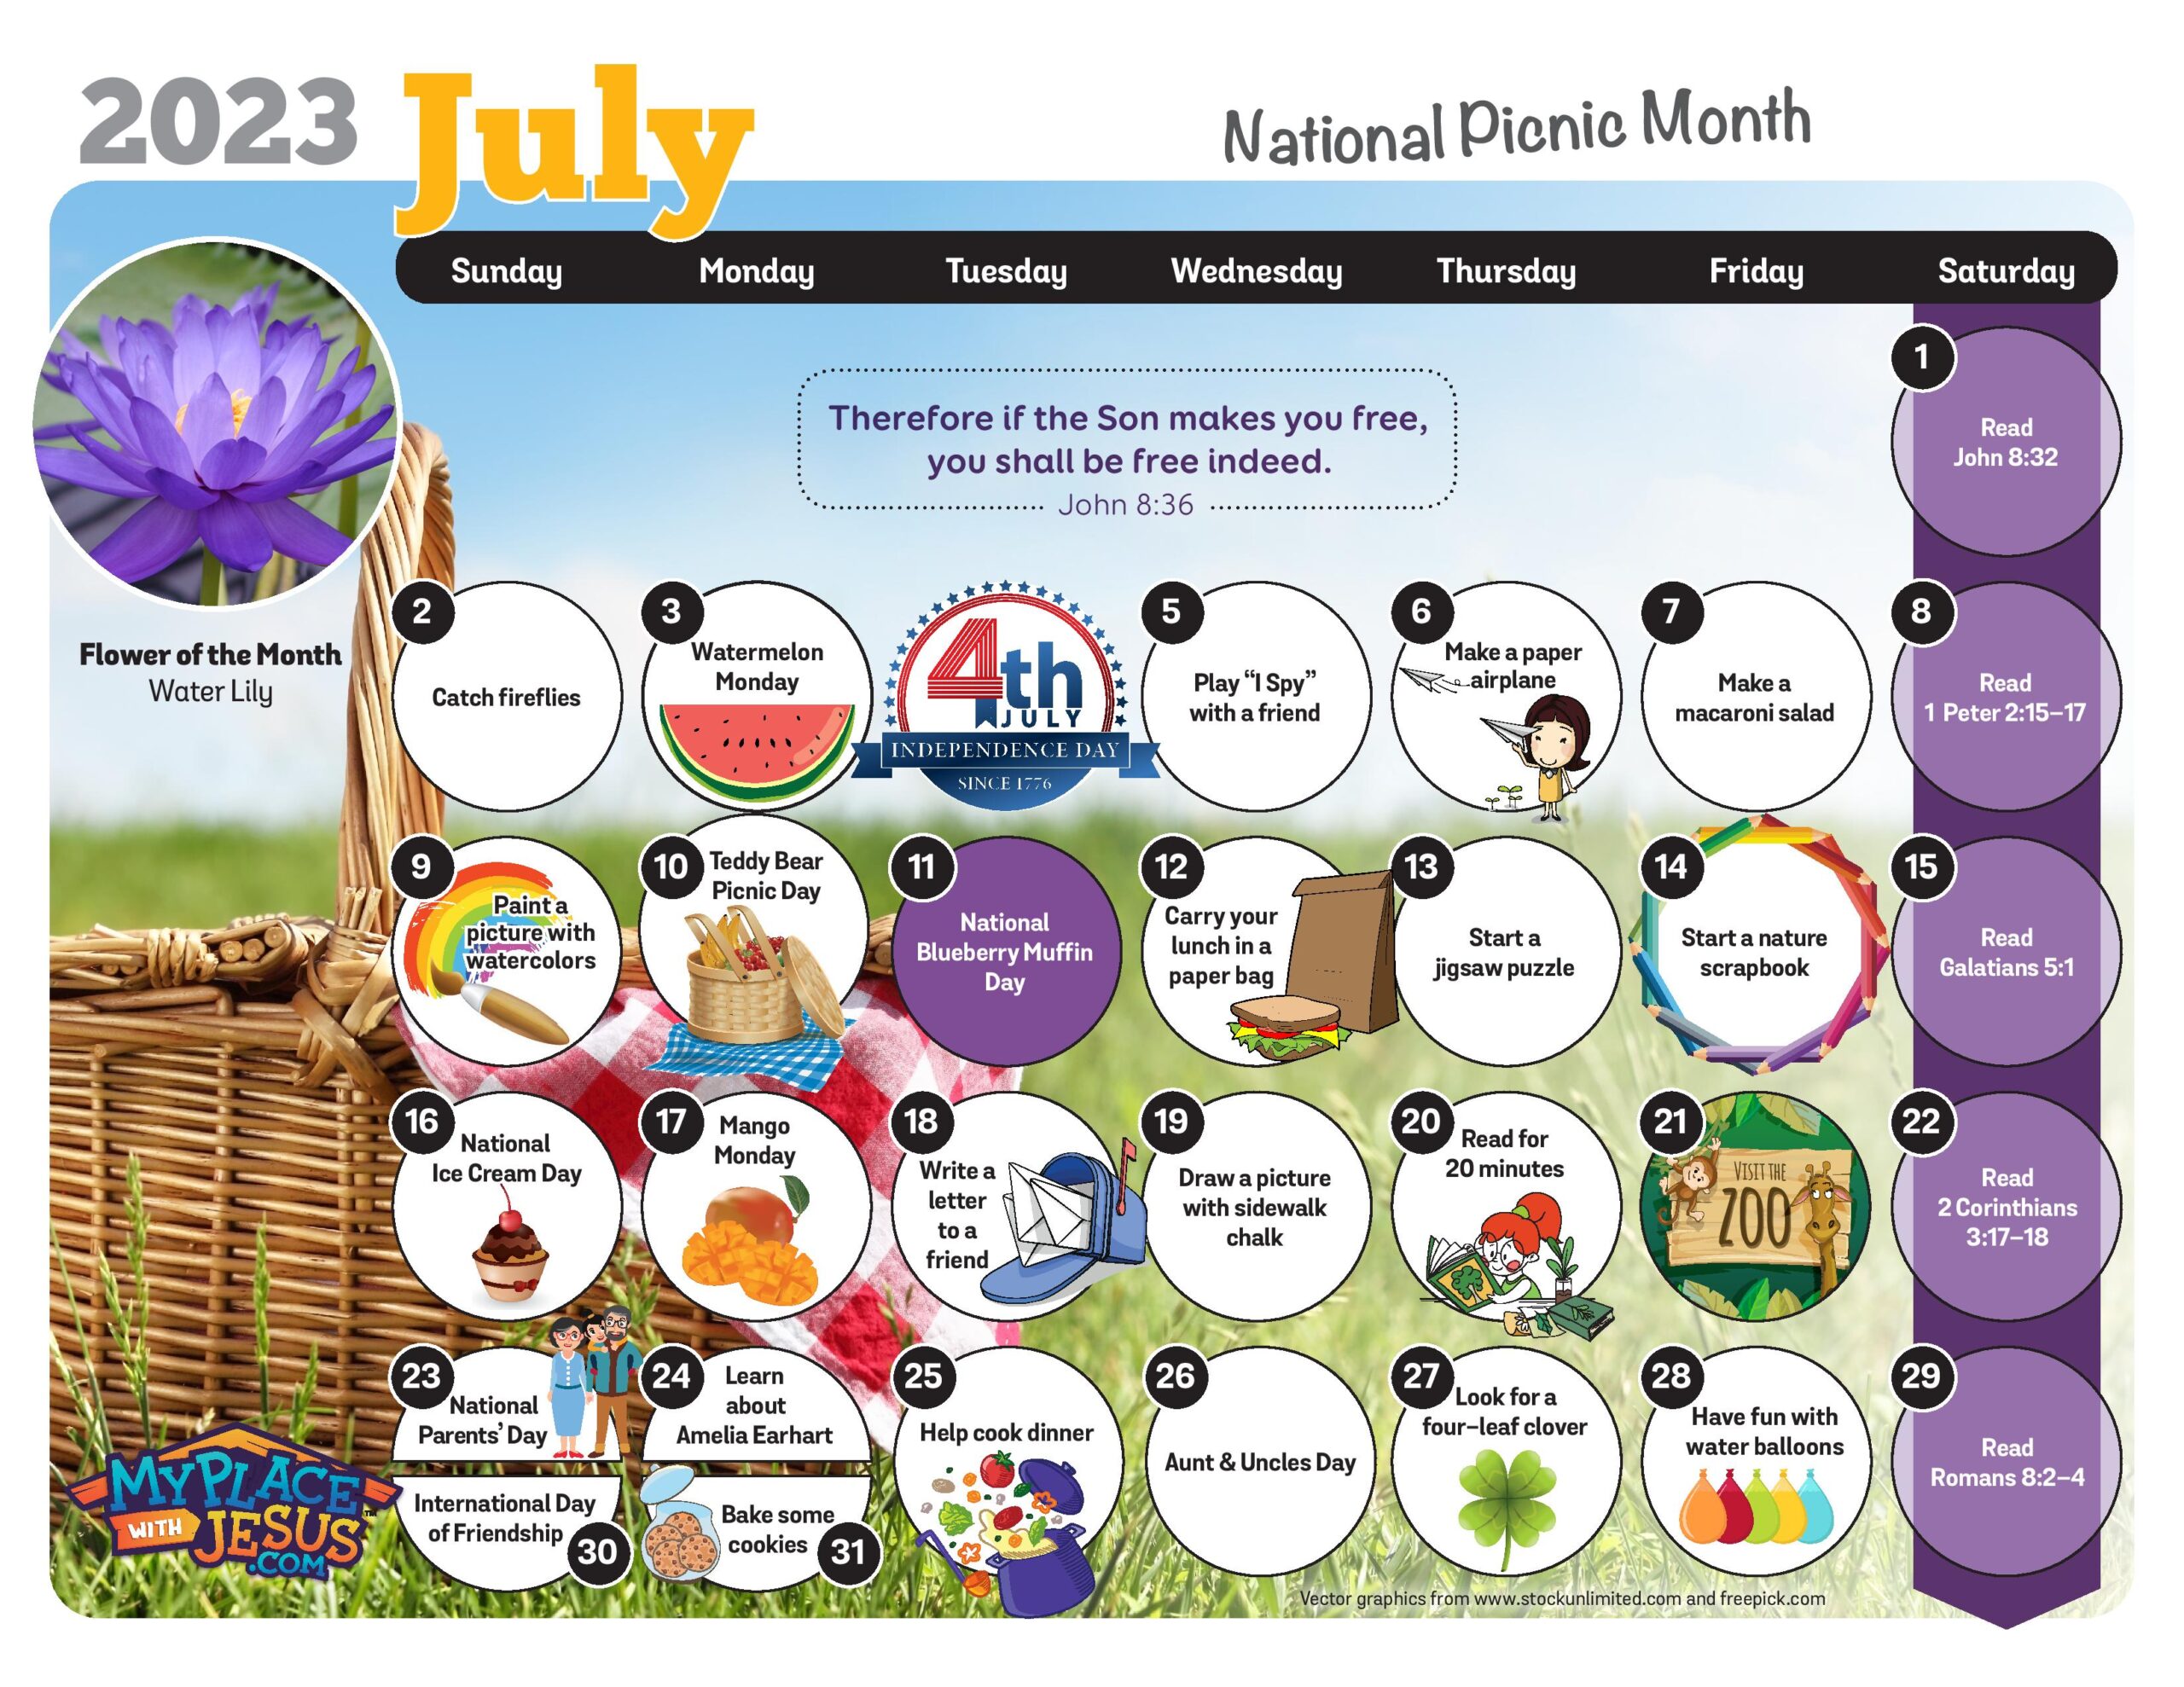 Download the July Activity Calendar